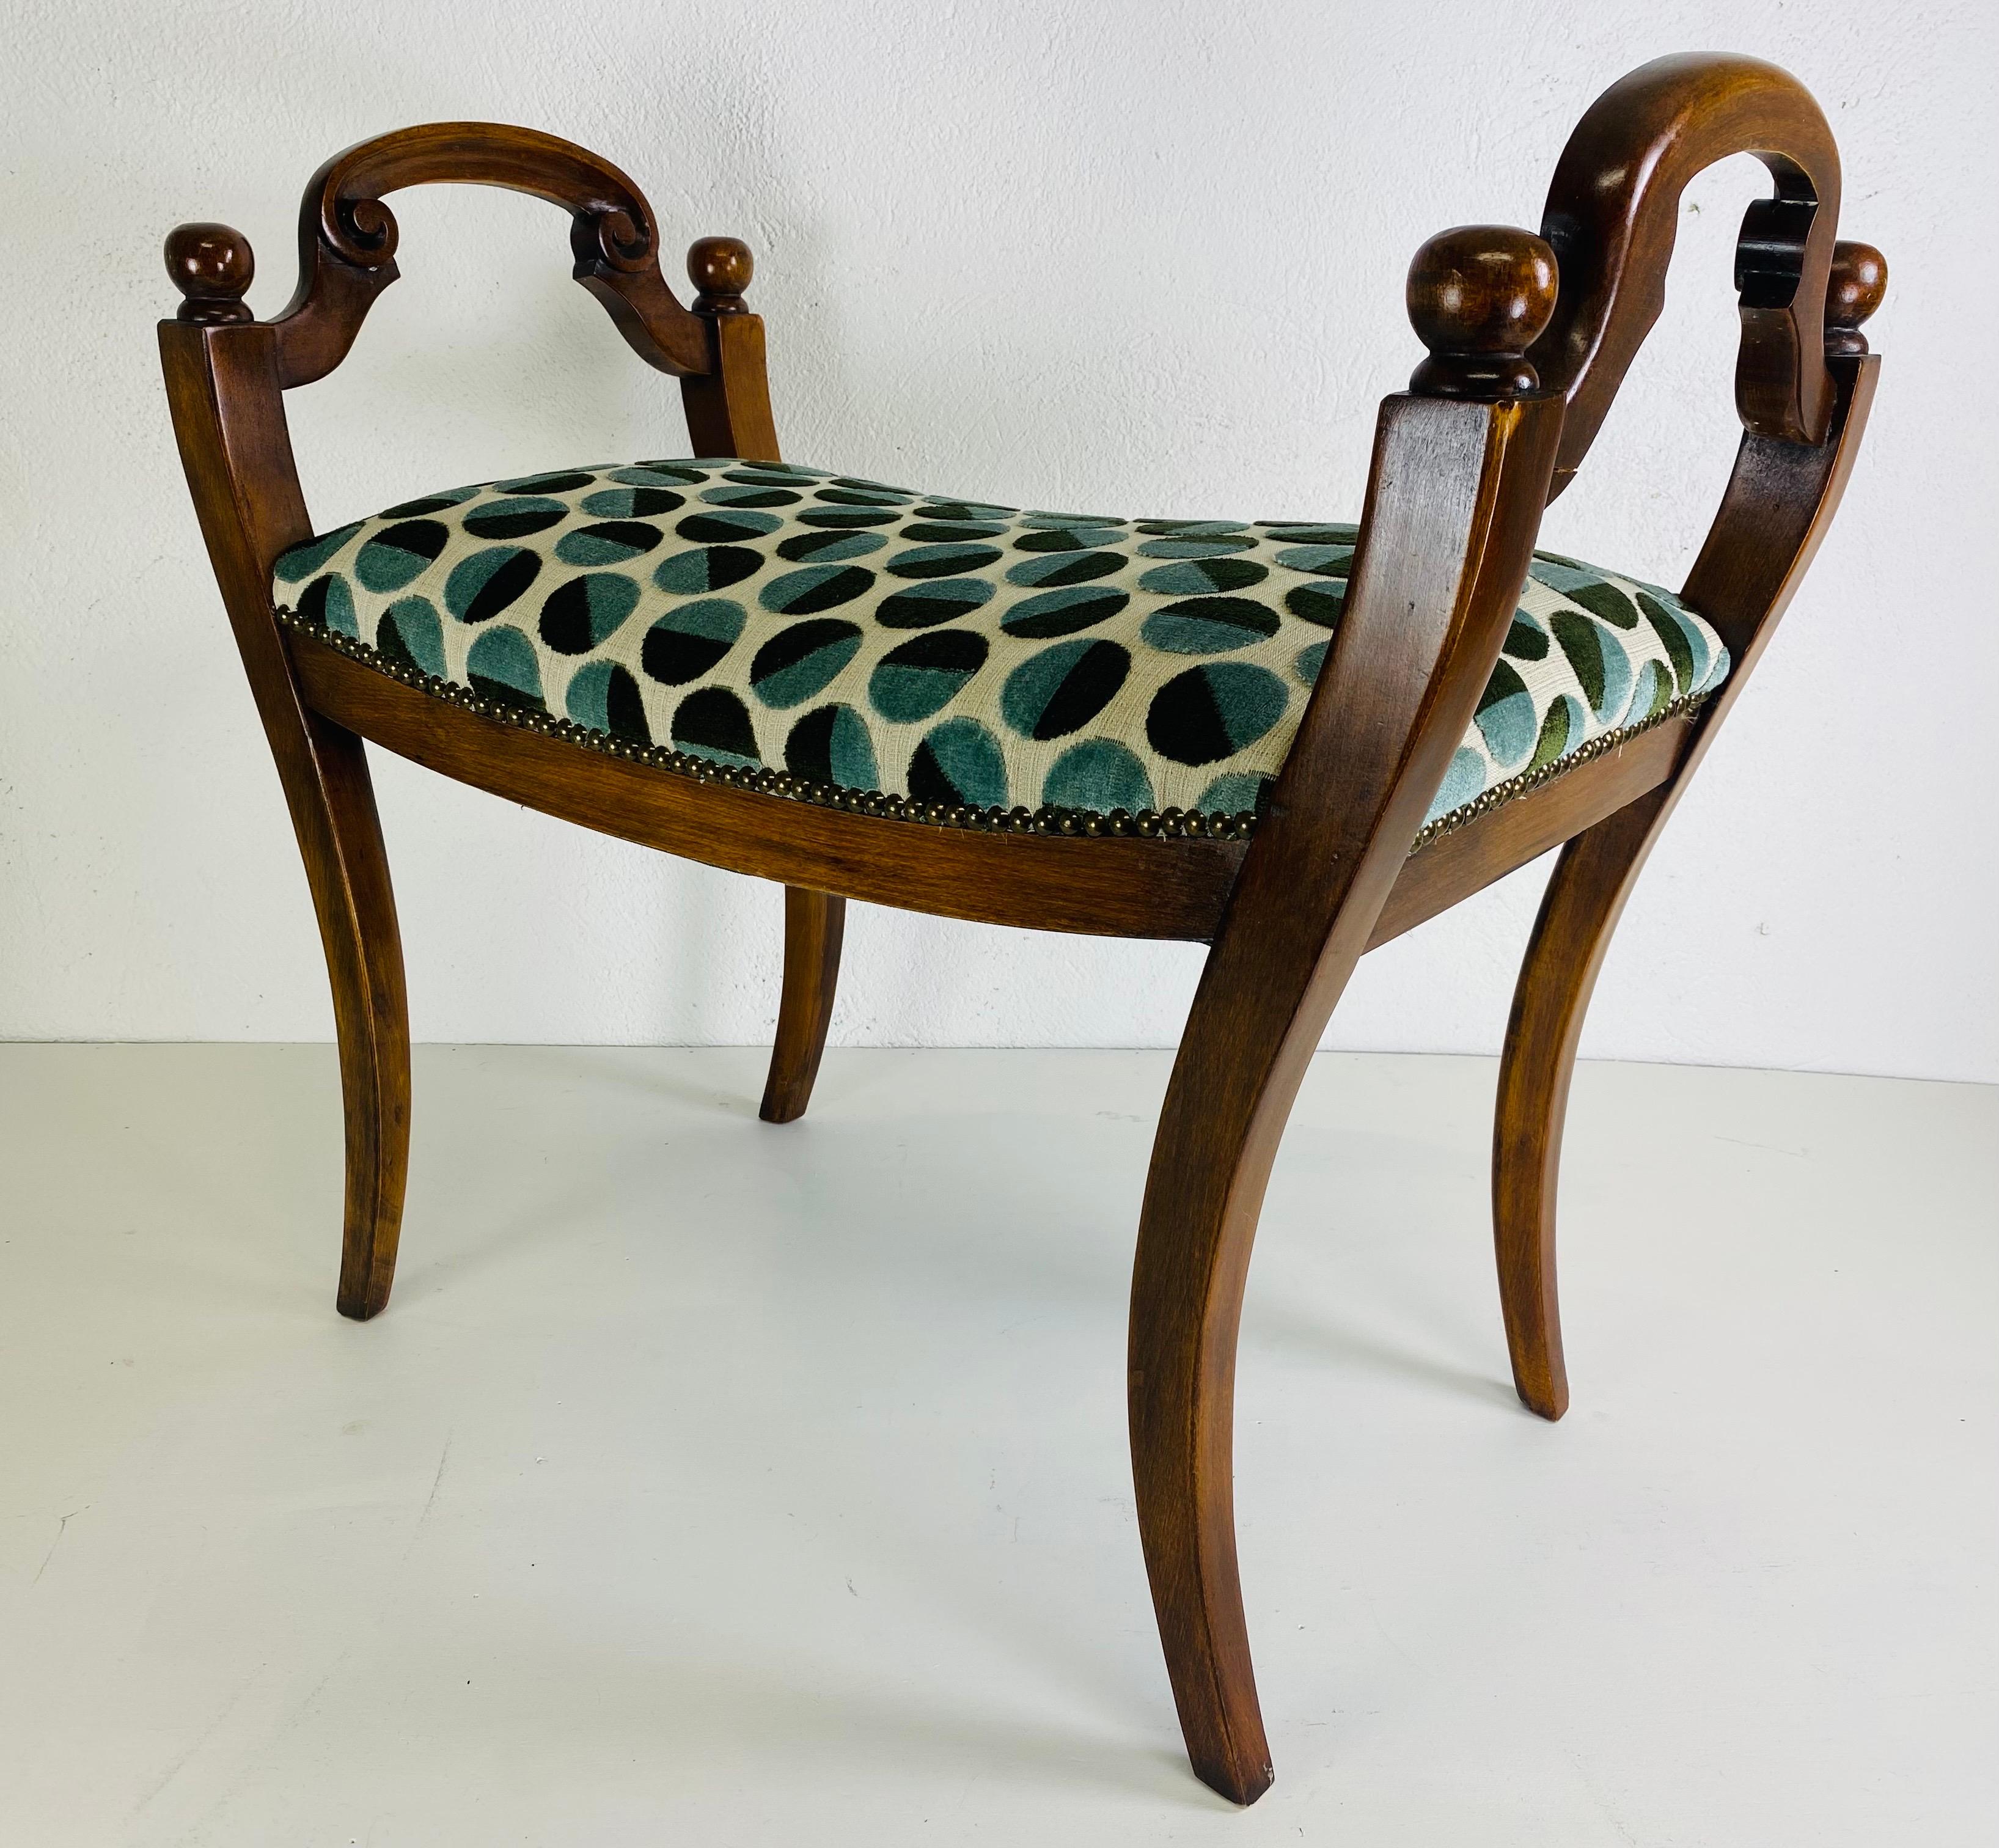 This is a mid century vintage newly upholstered Italian bench. This bench has a soft rococo carved frame with soft curved Klismos legs. The bench is upholstered in a modern polkadot cut velvet. The cut velvet has a cream background with sage and